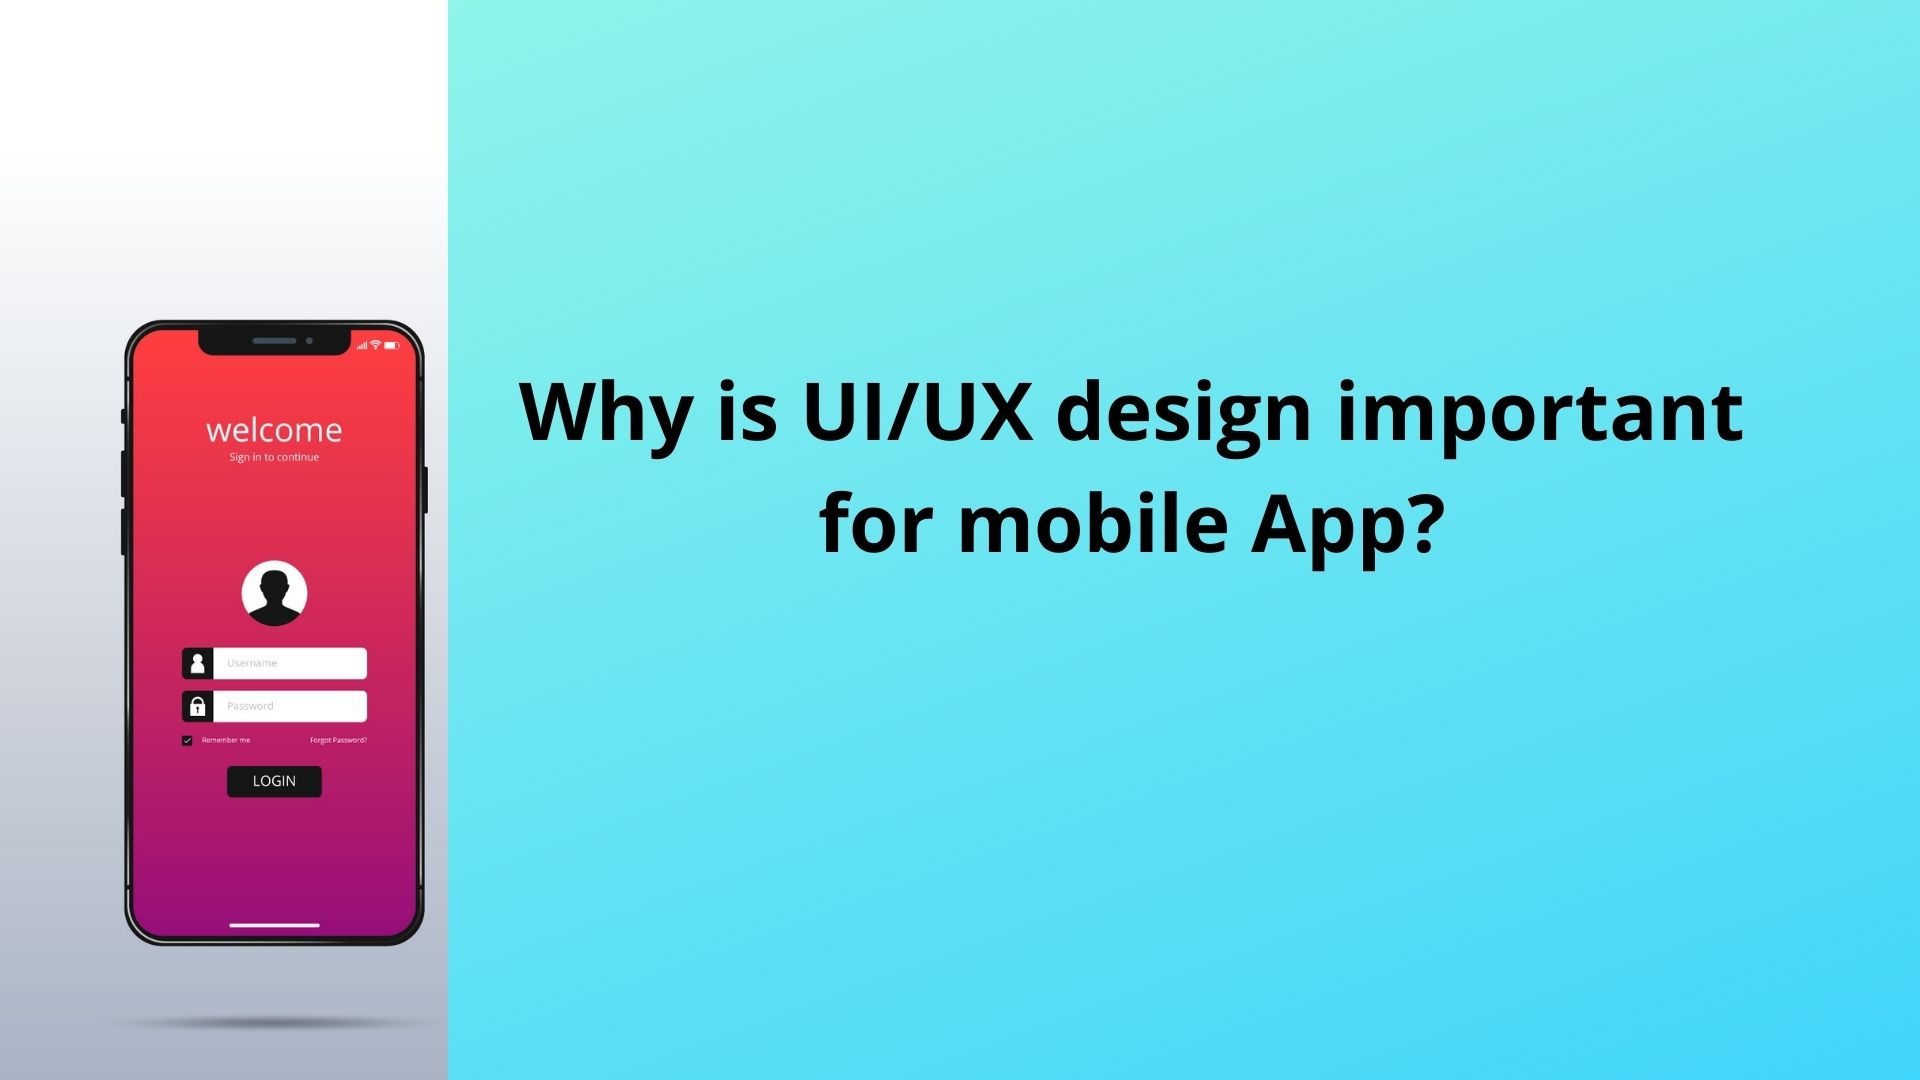 Why is UI/UX design important for mobile App?